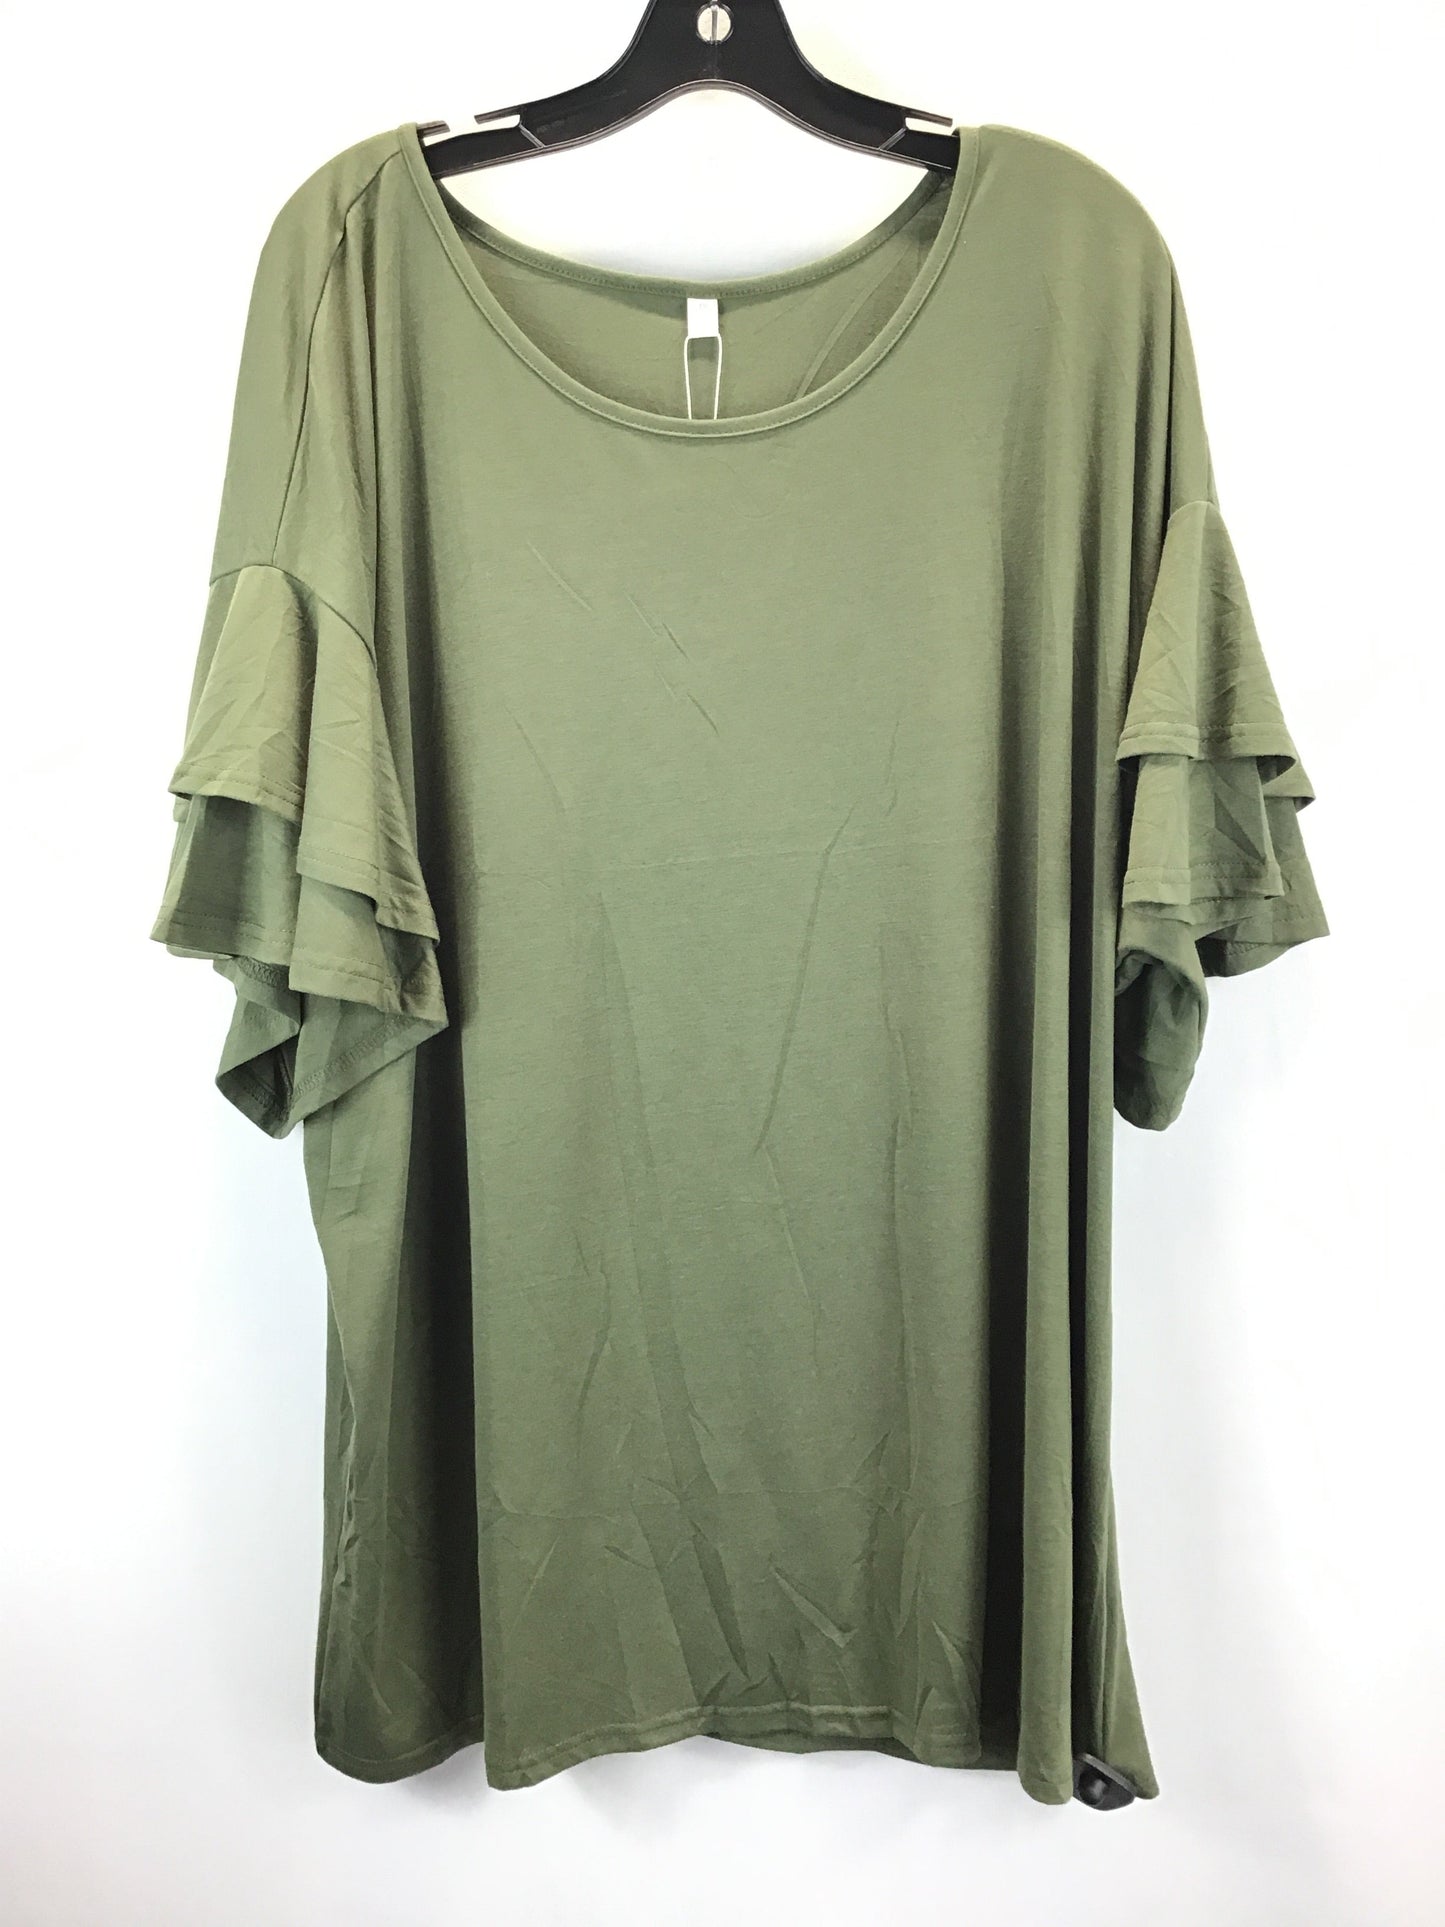 Green Top Short Sleeve Basic Clothes Mentor, Size 4x